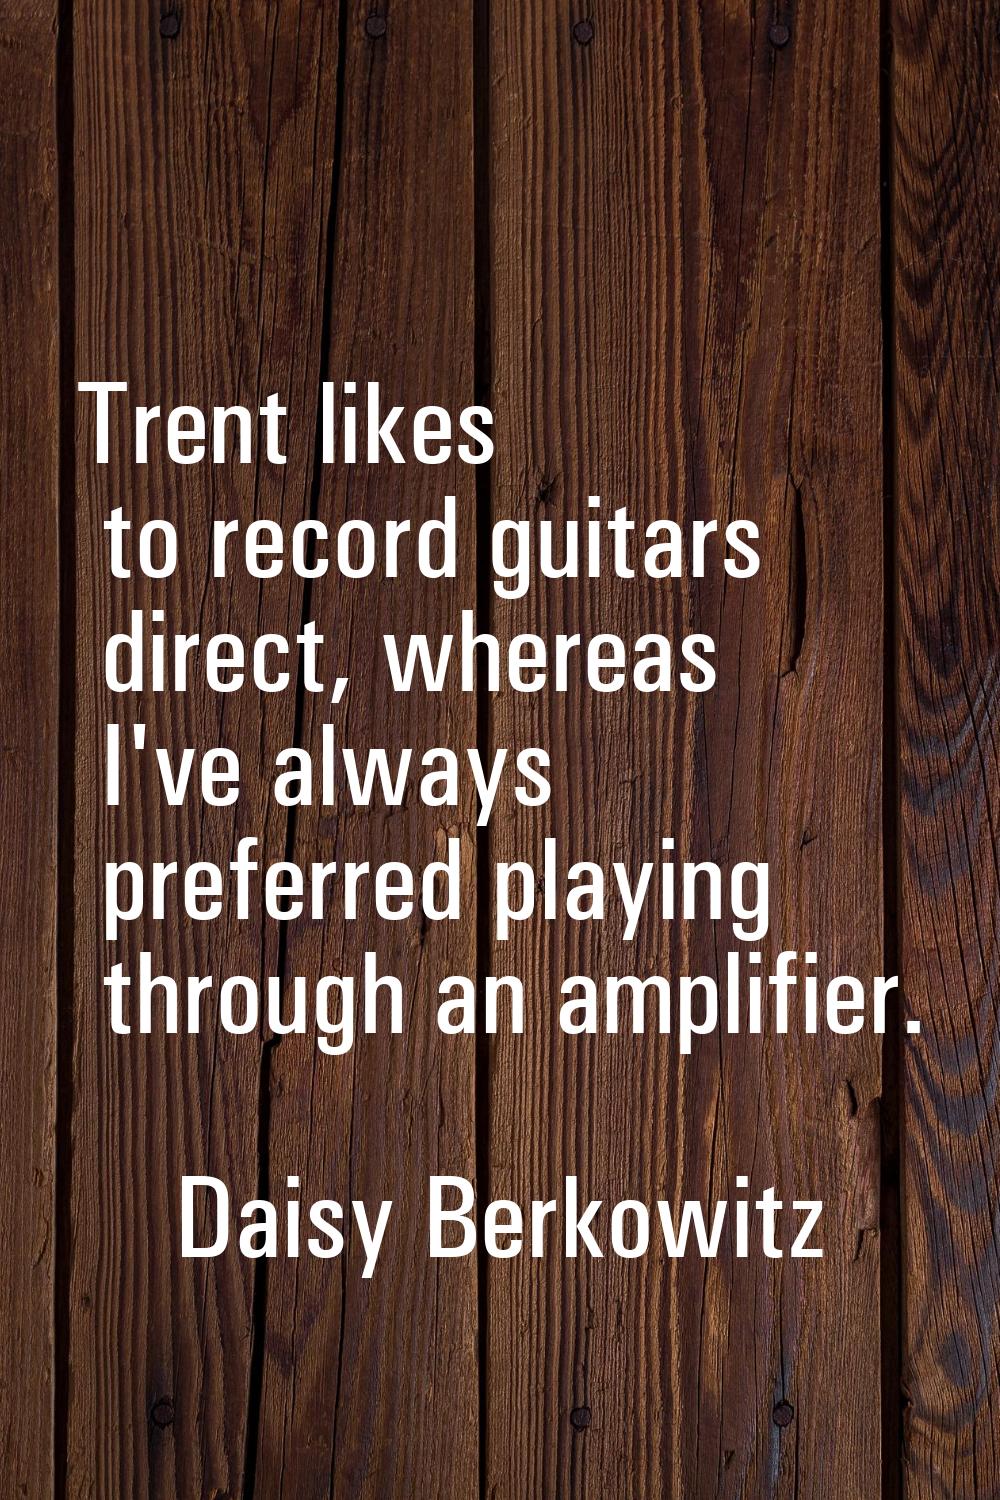 Trent likes to record guitars direct, whereas I've always preferred playing through an amplifier.